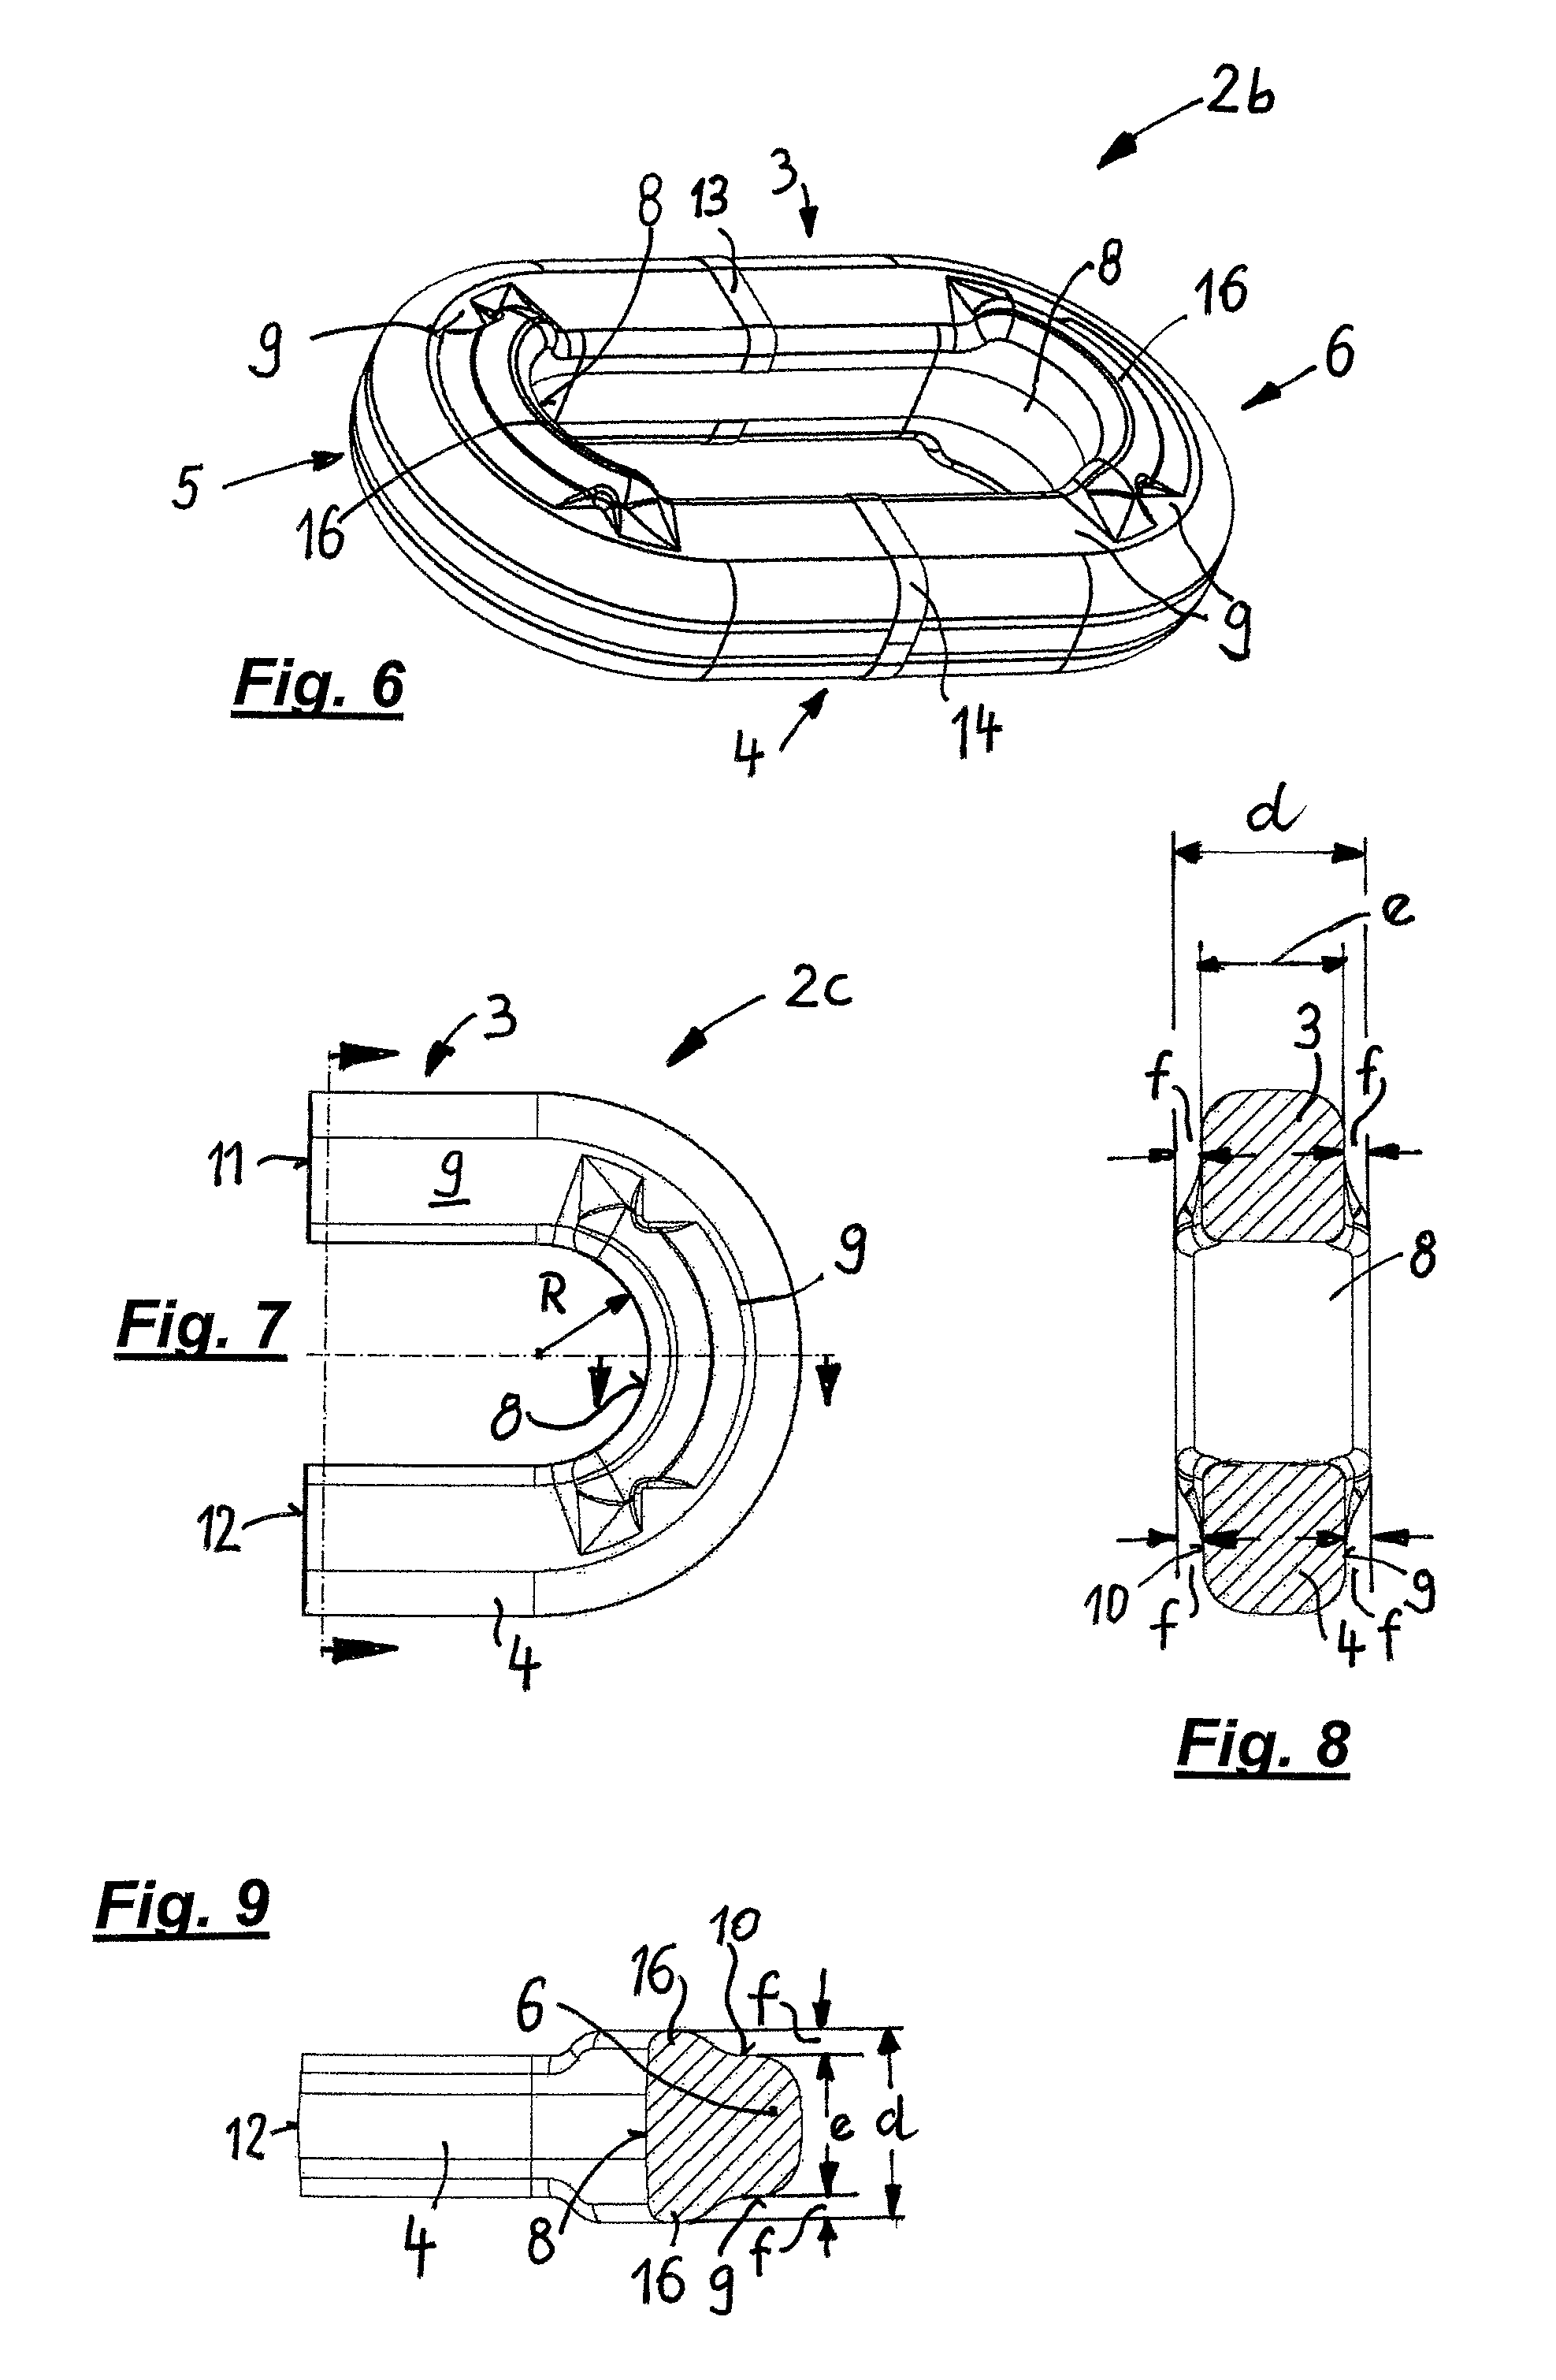 Chain consisting of oval profile chain links, and method for producing a chain of this type